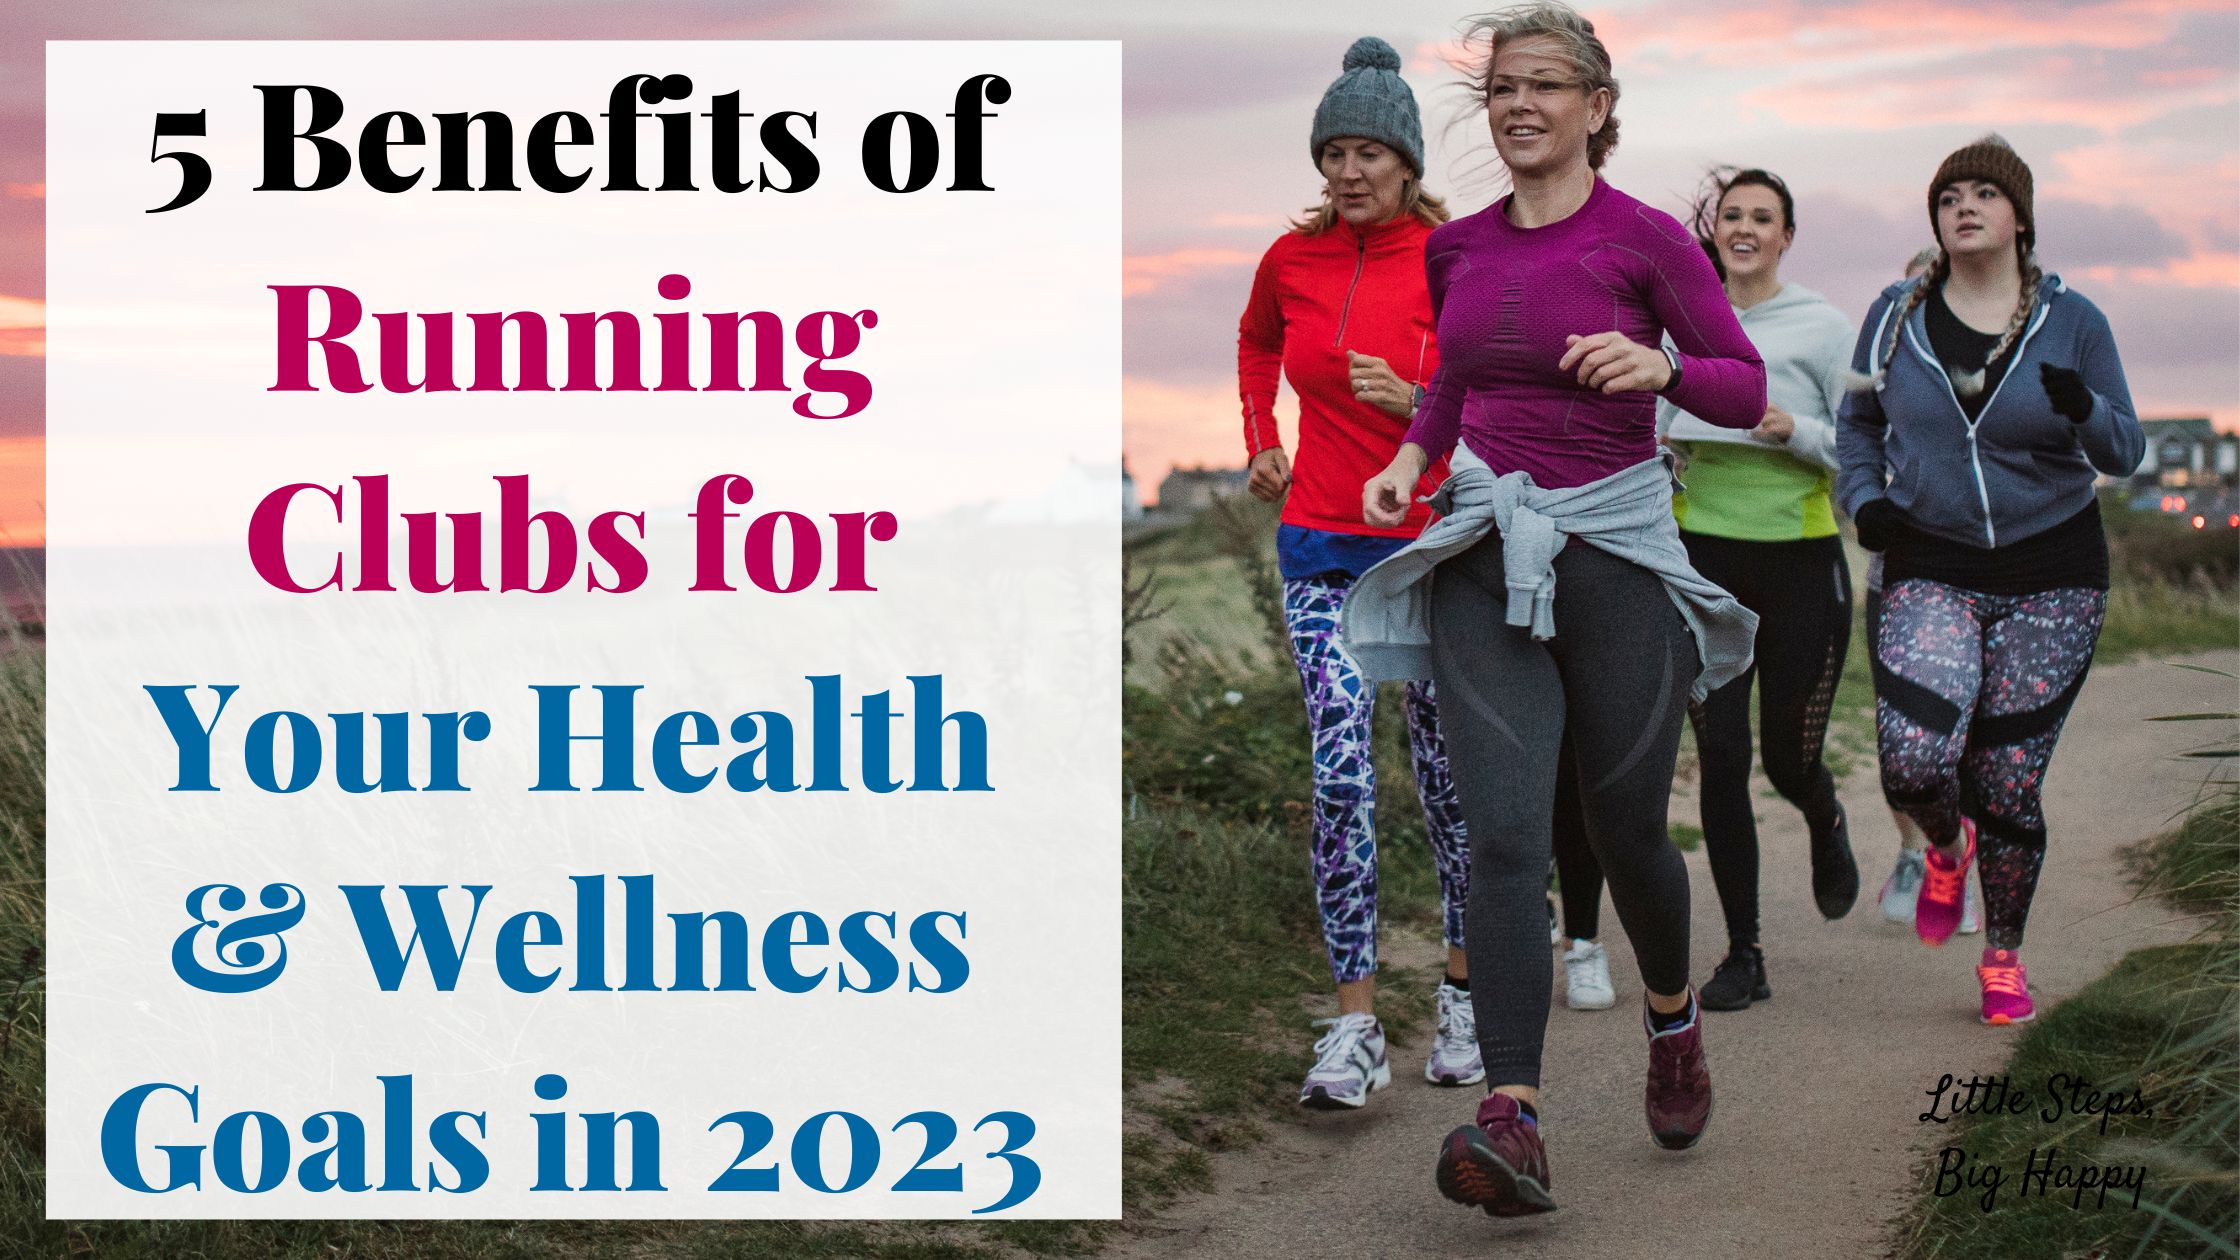 II. Benefits of Joining Running Clubs